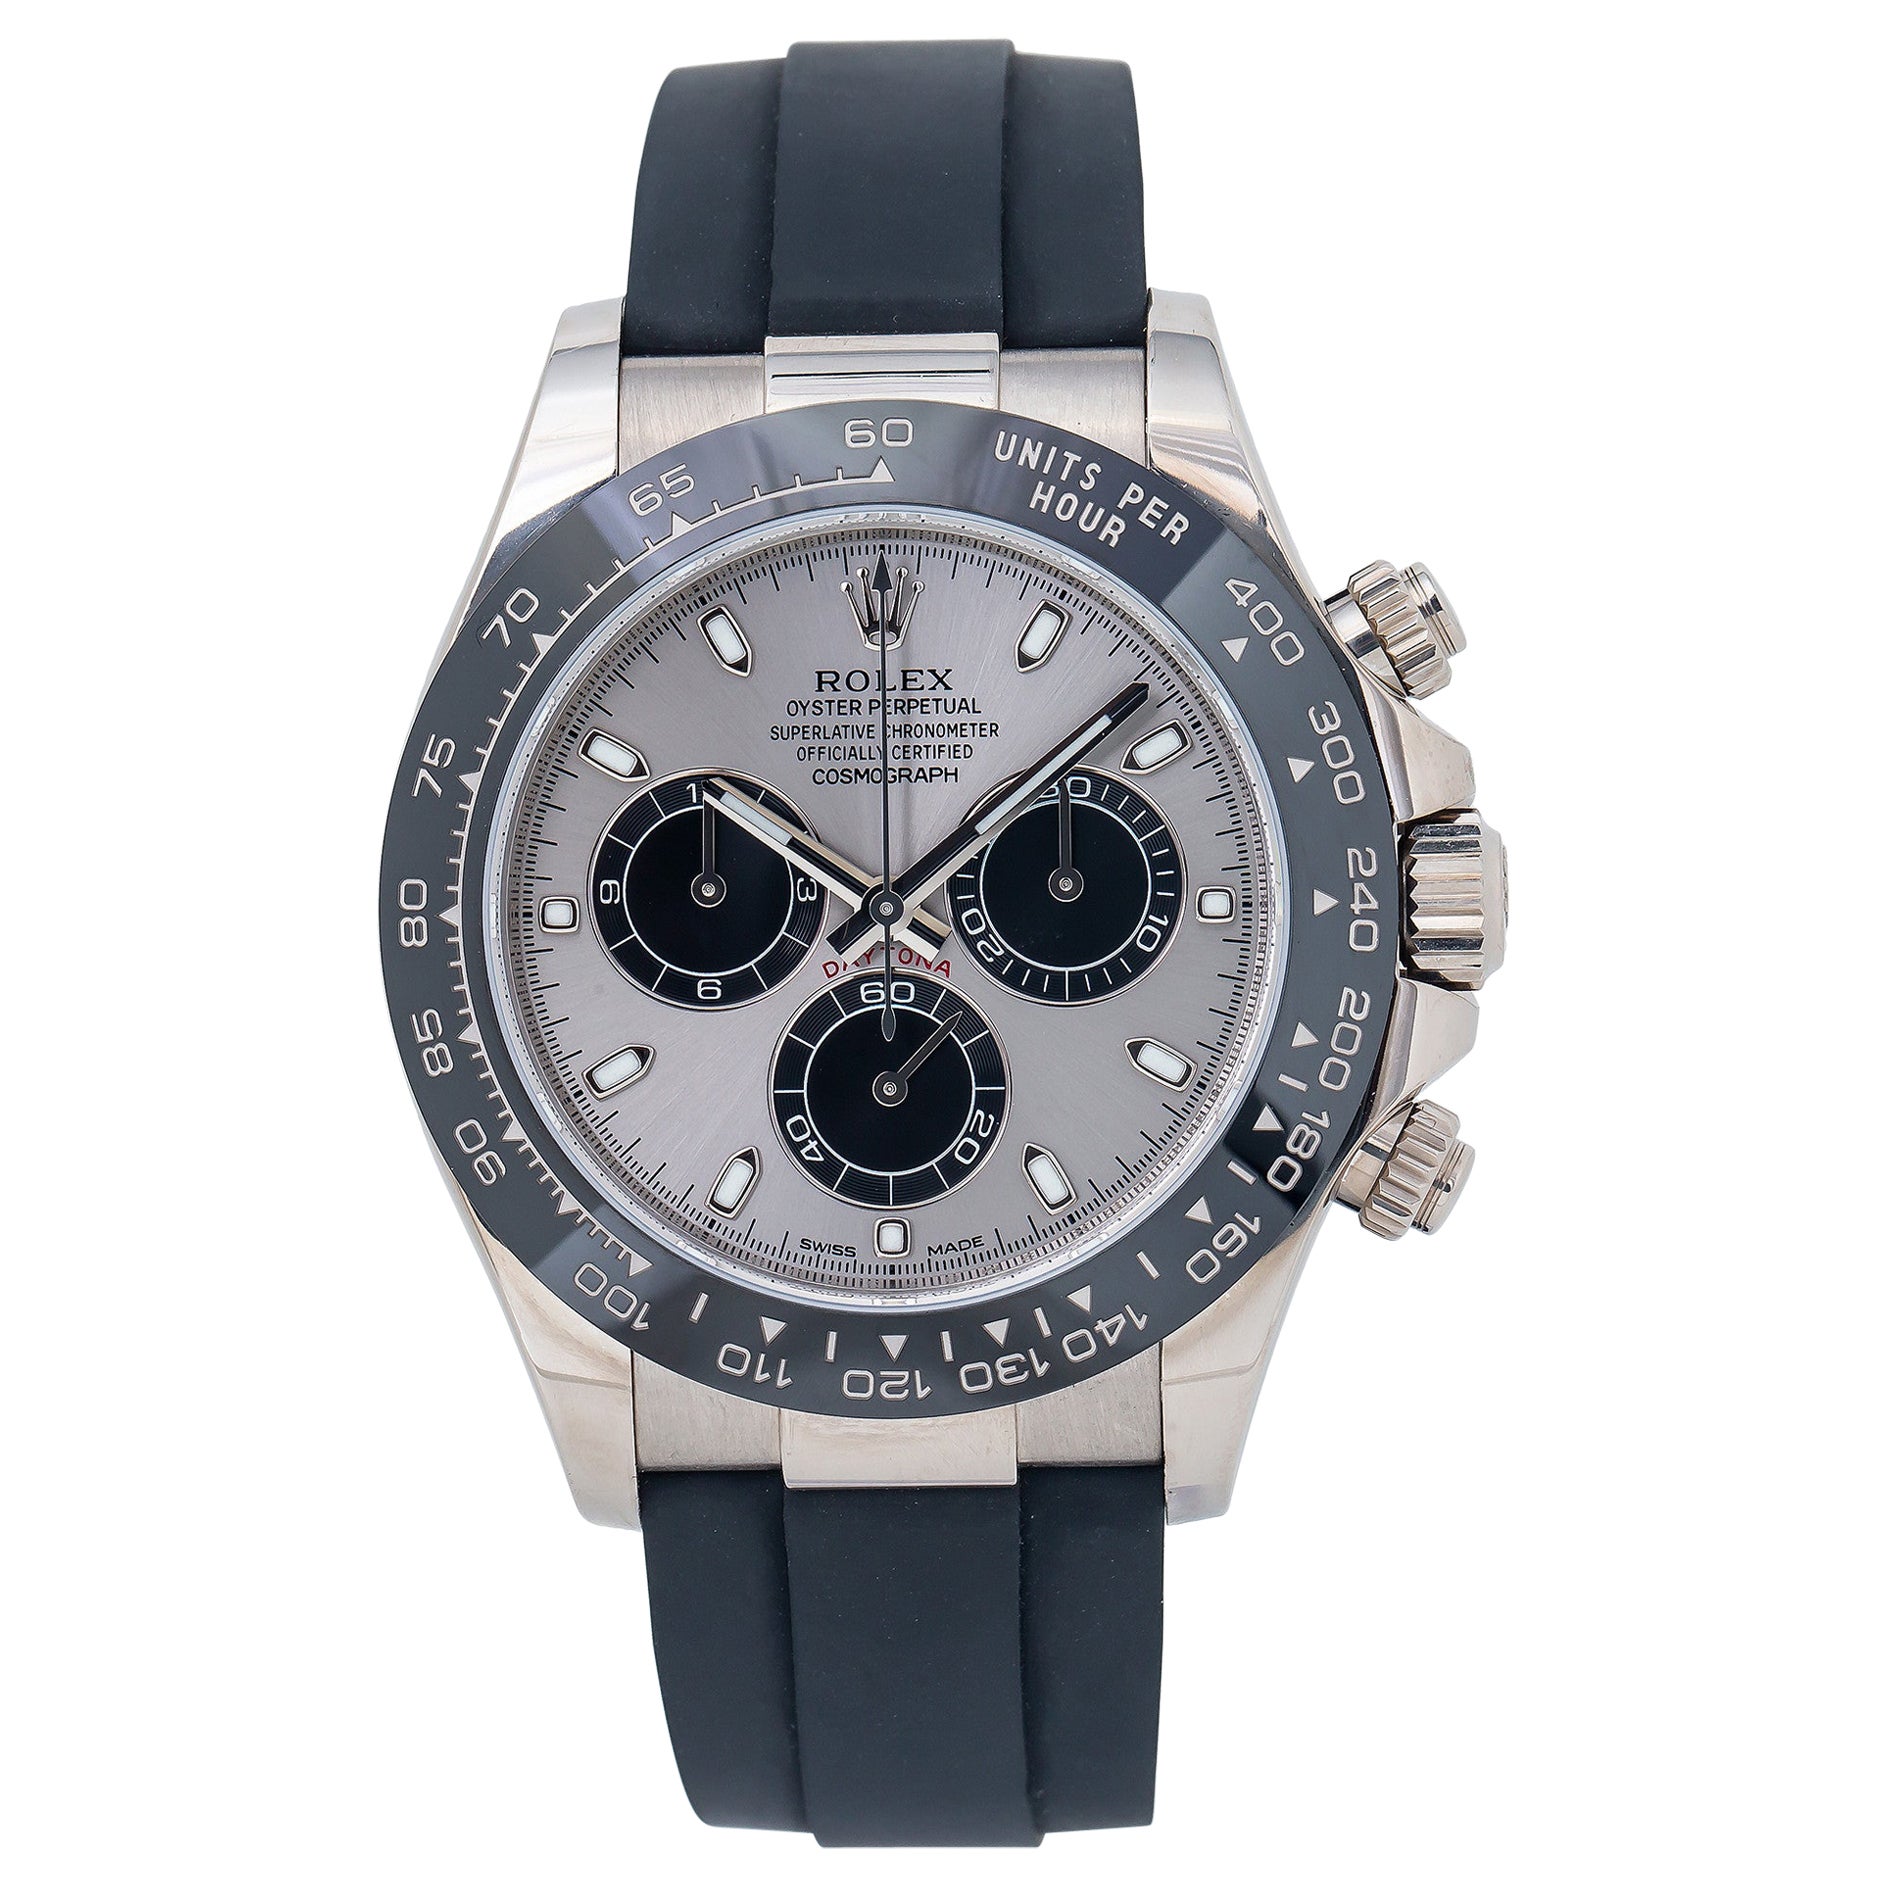 Rolex Daytona Cosmograph White Gold 116519ln-0027 For Sale at 1stDibs